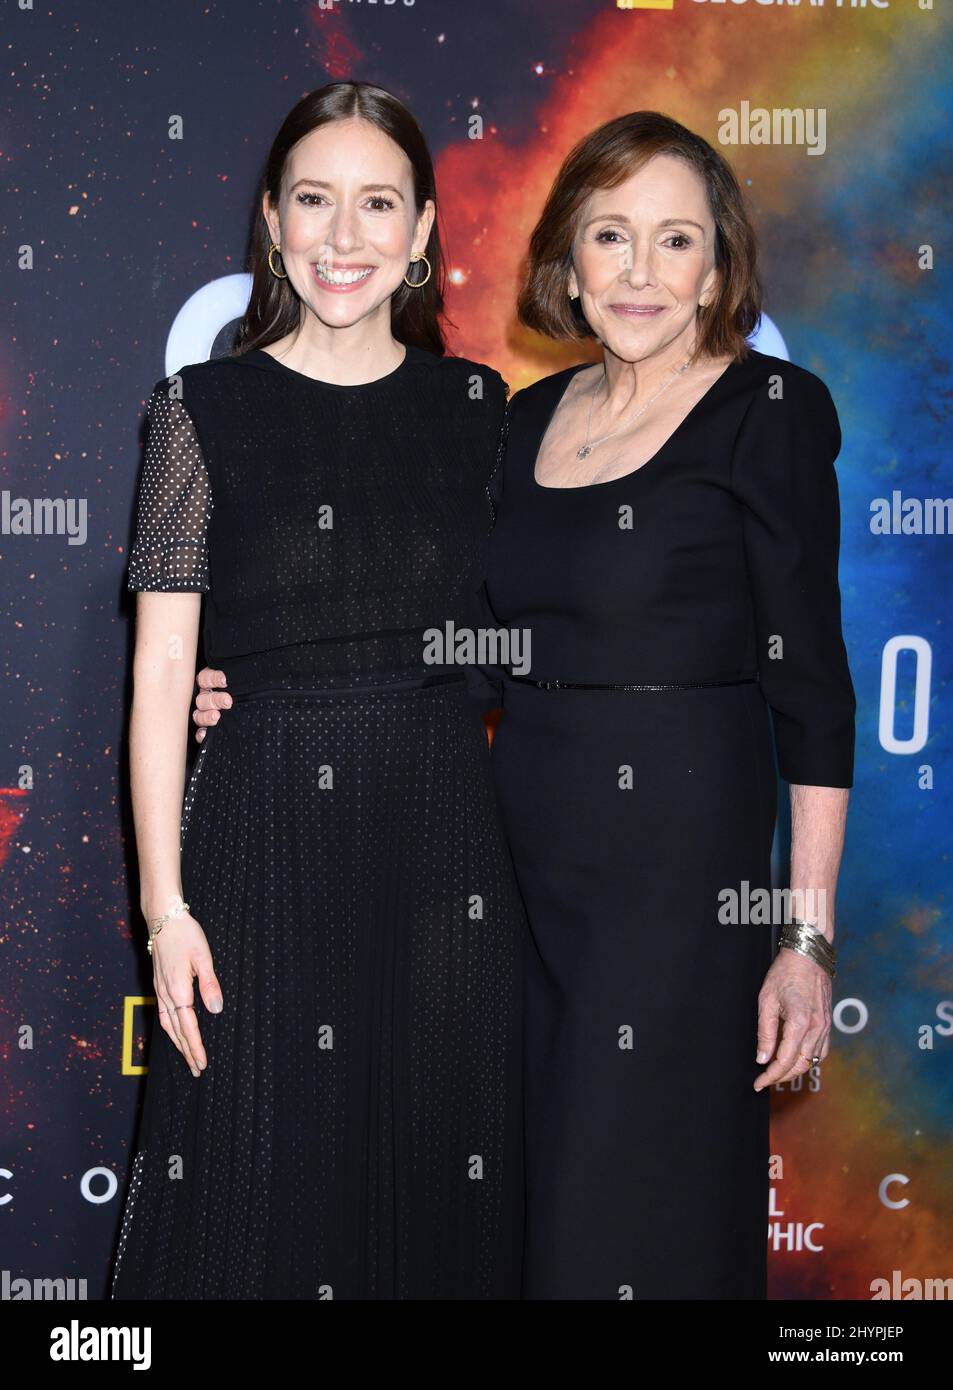 Sasha Sagan and Ann Druyan at National Geographic's 'Cosmos: Possible Worlds' Los Angeles Premiere held at Royce Hall UCLA on February 26, 2020 in Los Angeles. Stock Photo